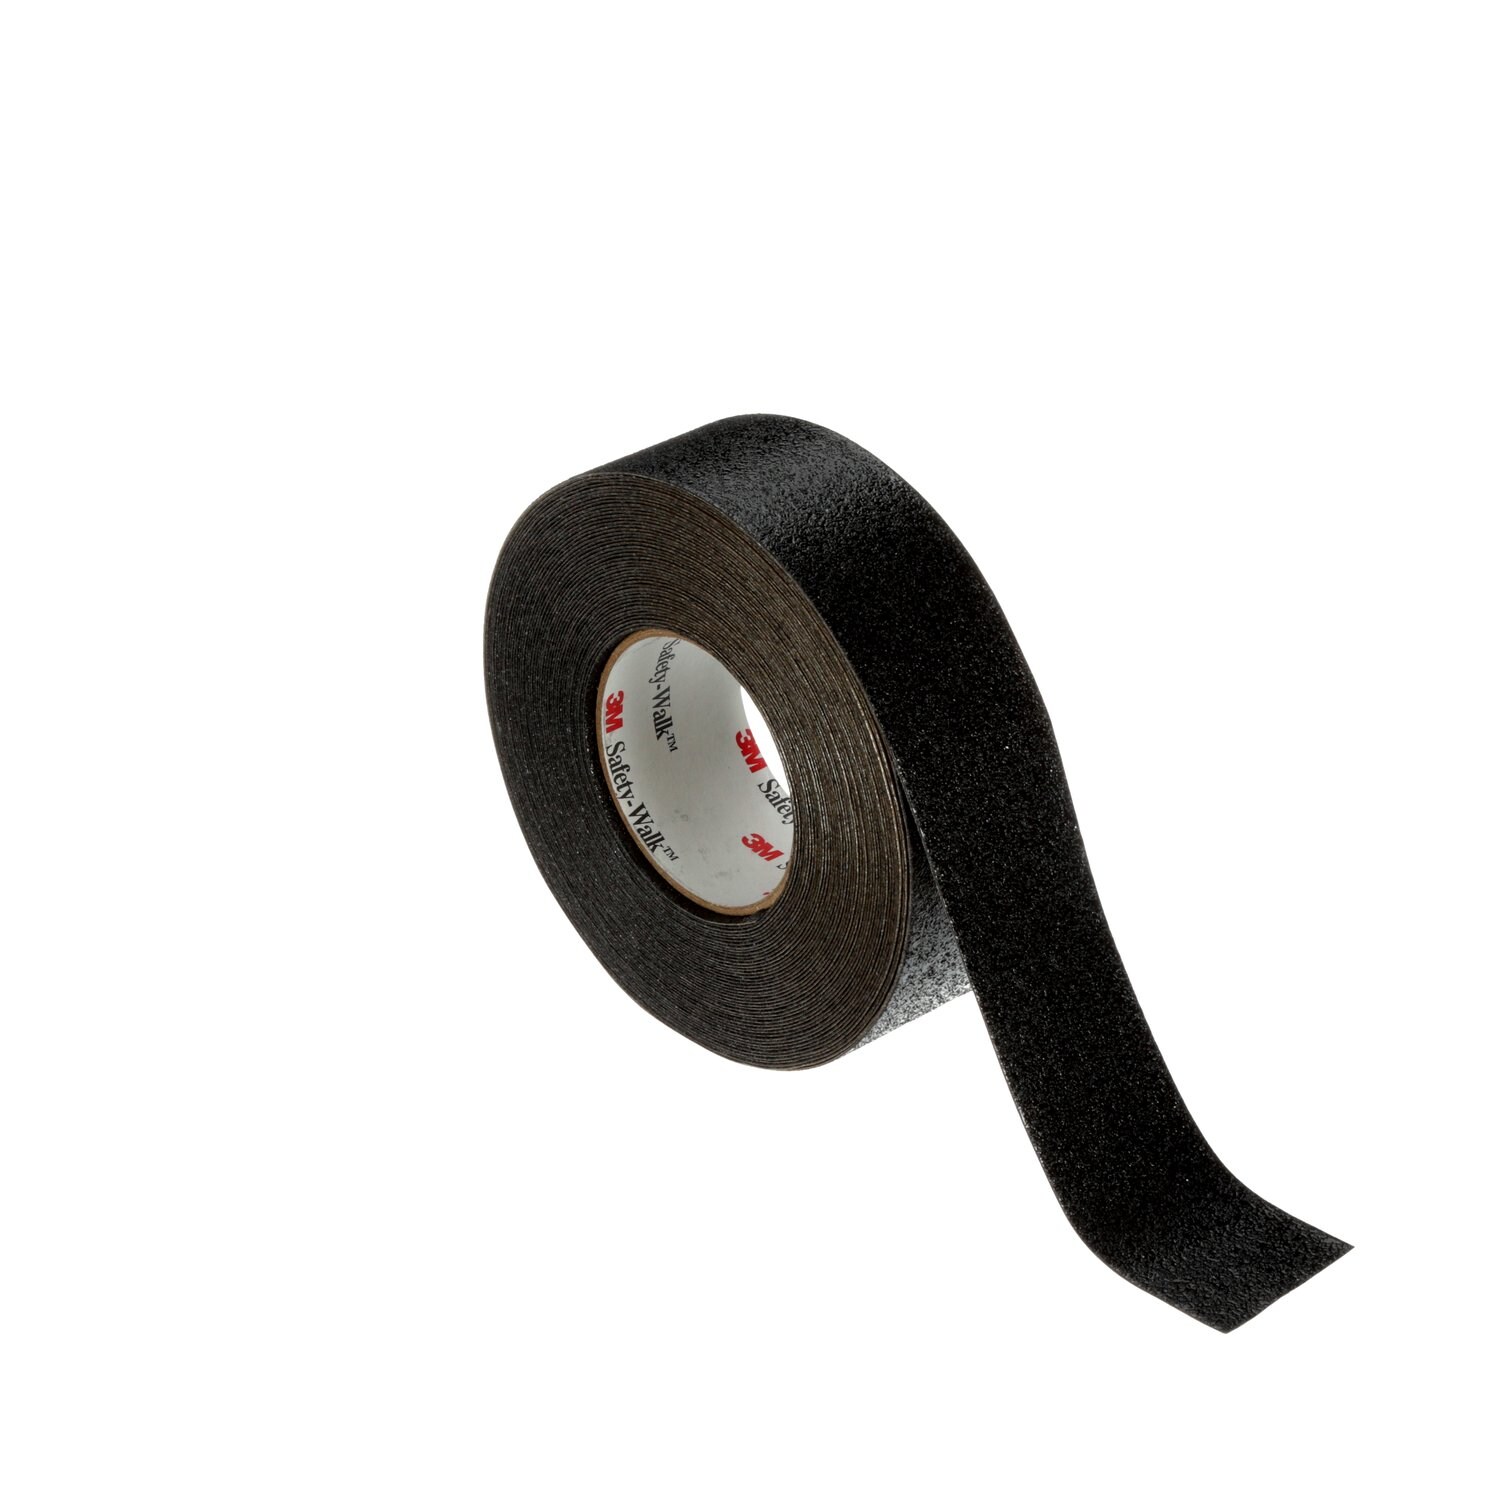 3M Safety-Walk Slip-Resistant Conformable Tapes & Treads 510, Black, 2 in x 60 ft, Roll